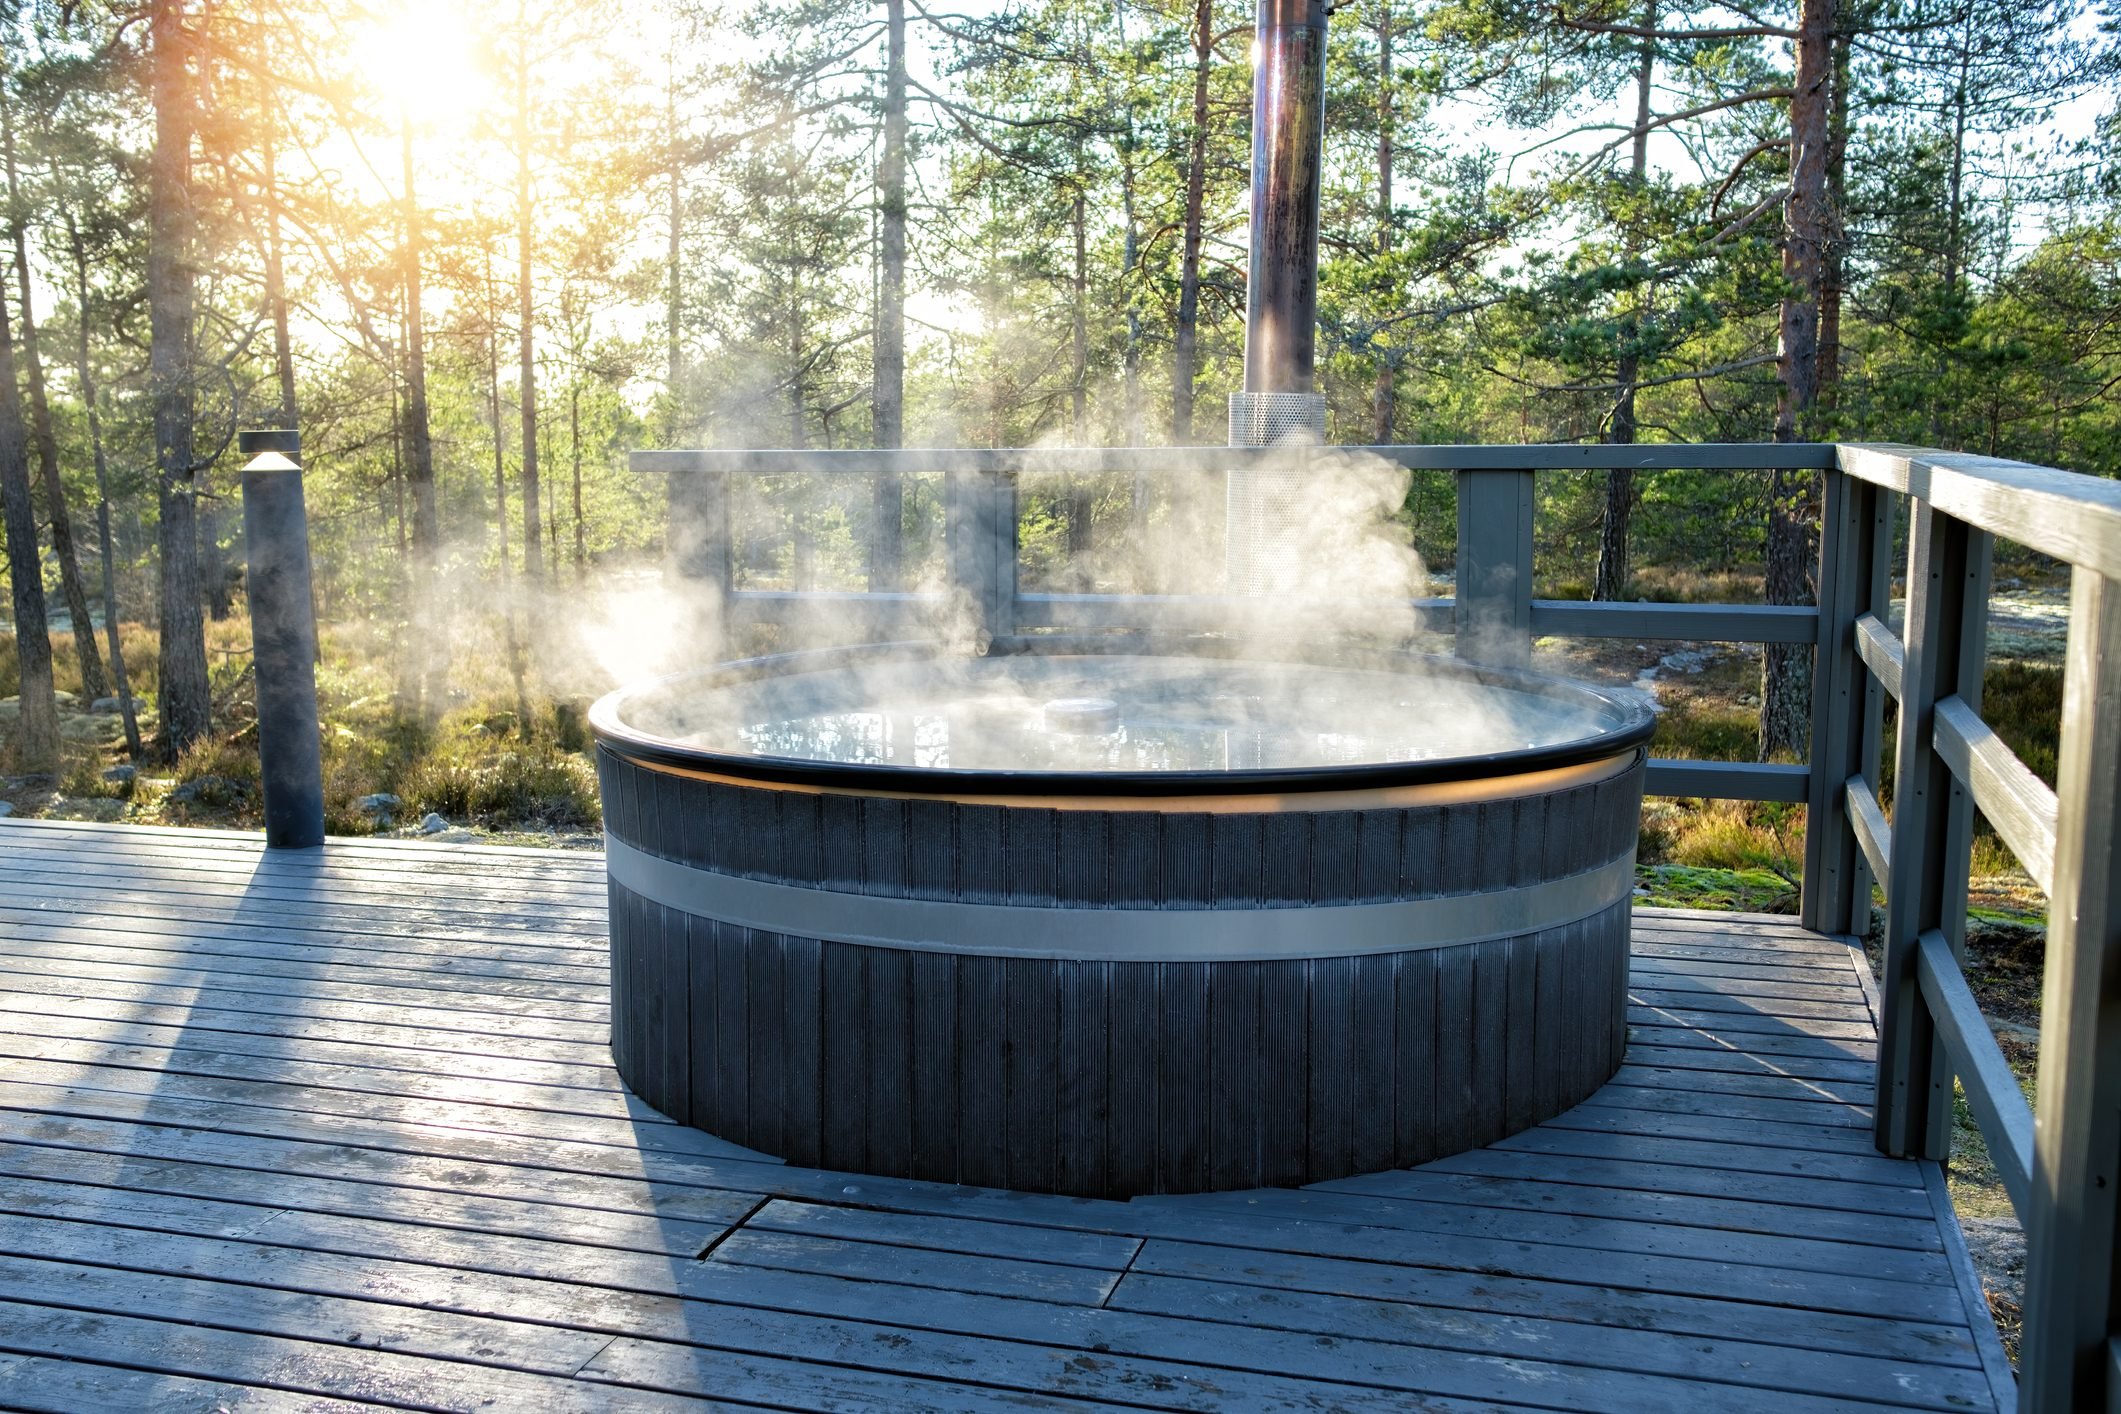 Jacuzzis vs. Hot Tubs: What's the Difference?